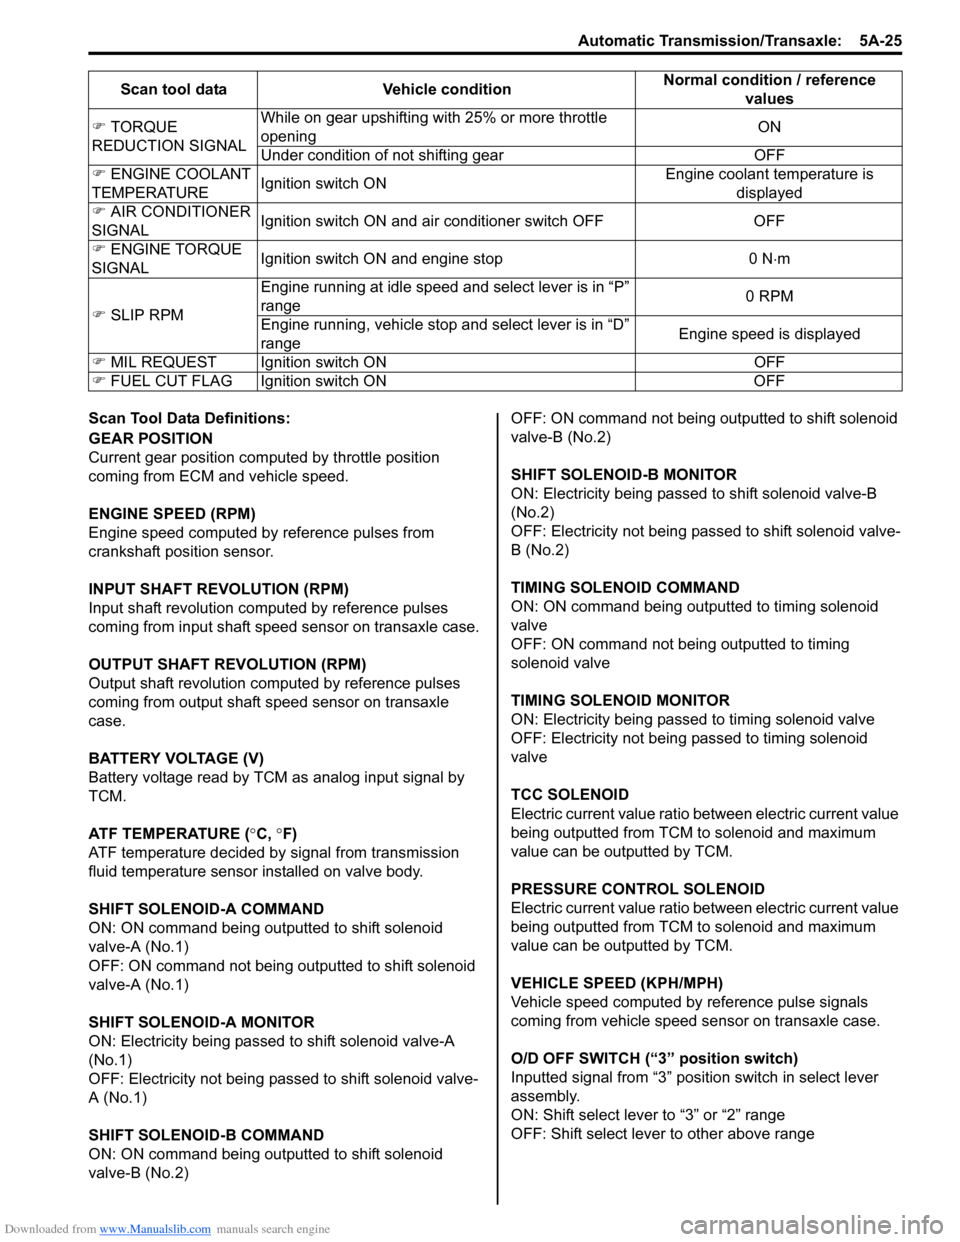 SUZUKI SWIFT 2007 2.G Service Workshop Manual Downloaded from www.Manualslib.com manuals search engine Automatic Transmission/Transaxle:  5A-25
Scan Tool Data Definitions:
GEAR POSITION
Current gear position computed by throttle position 
coming 